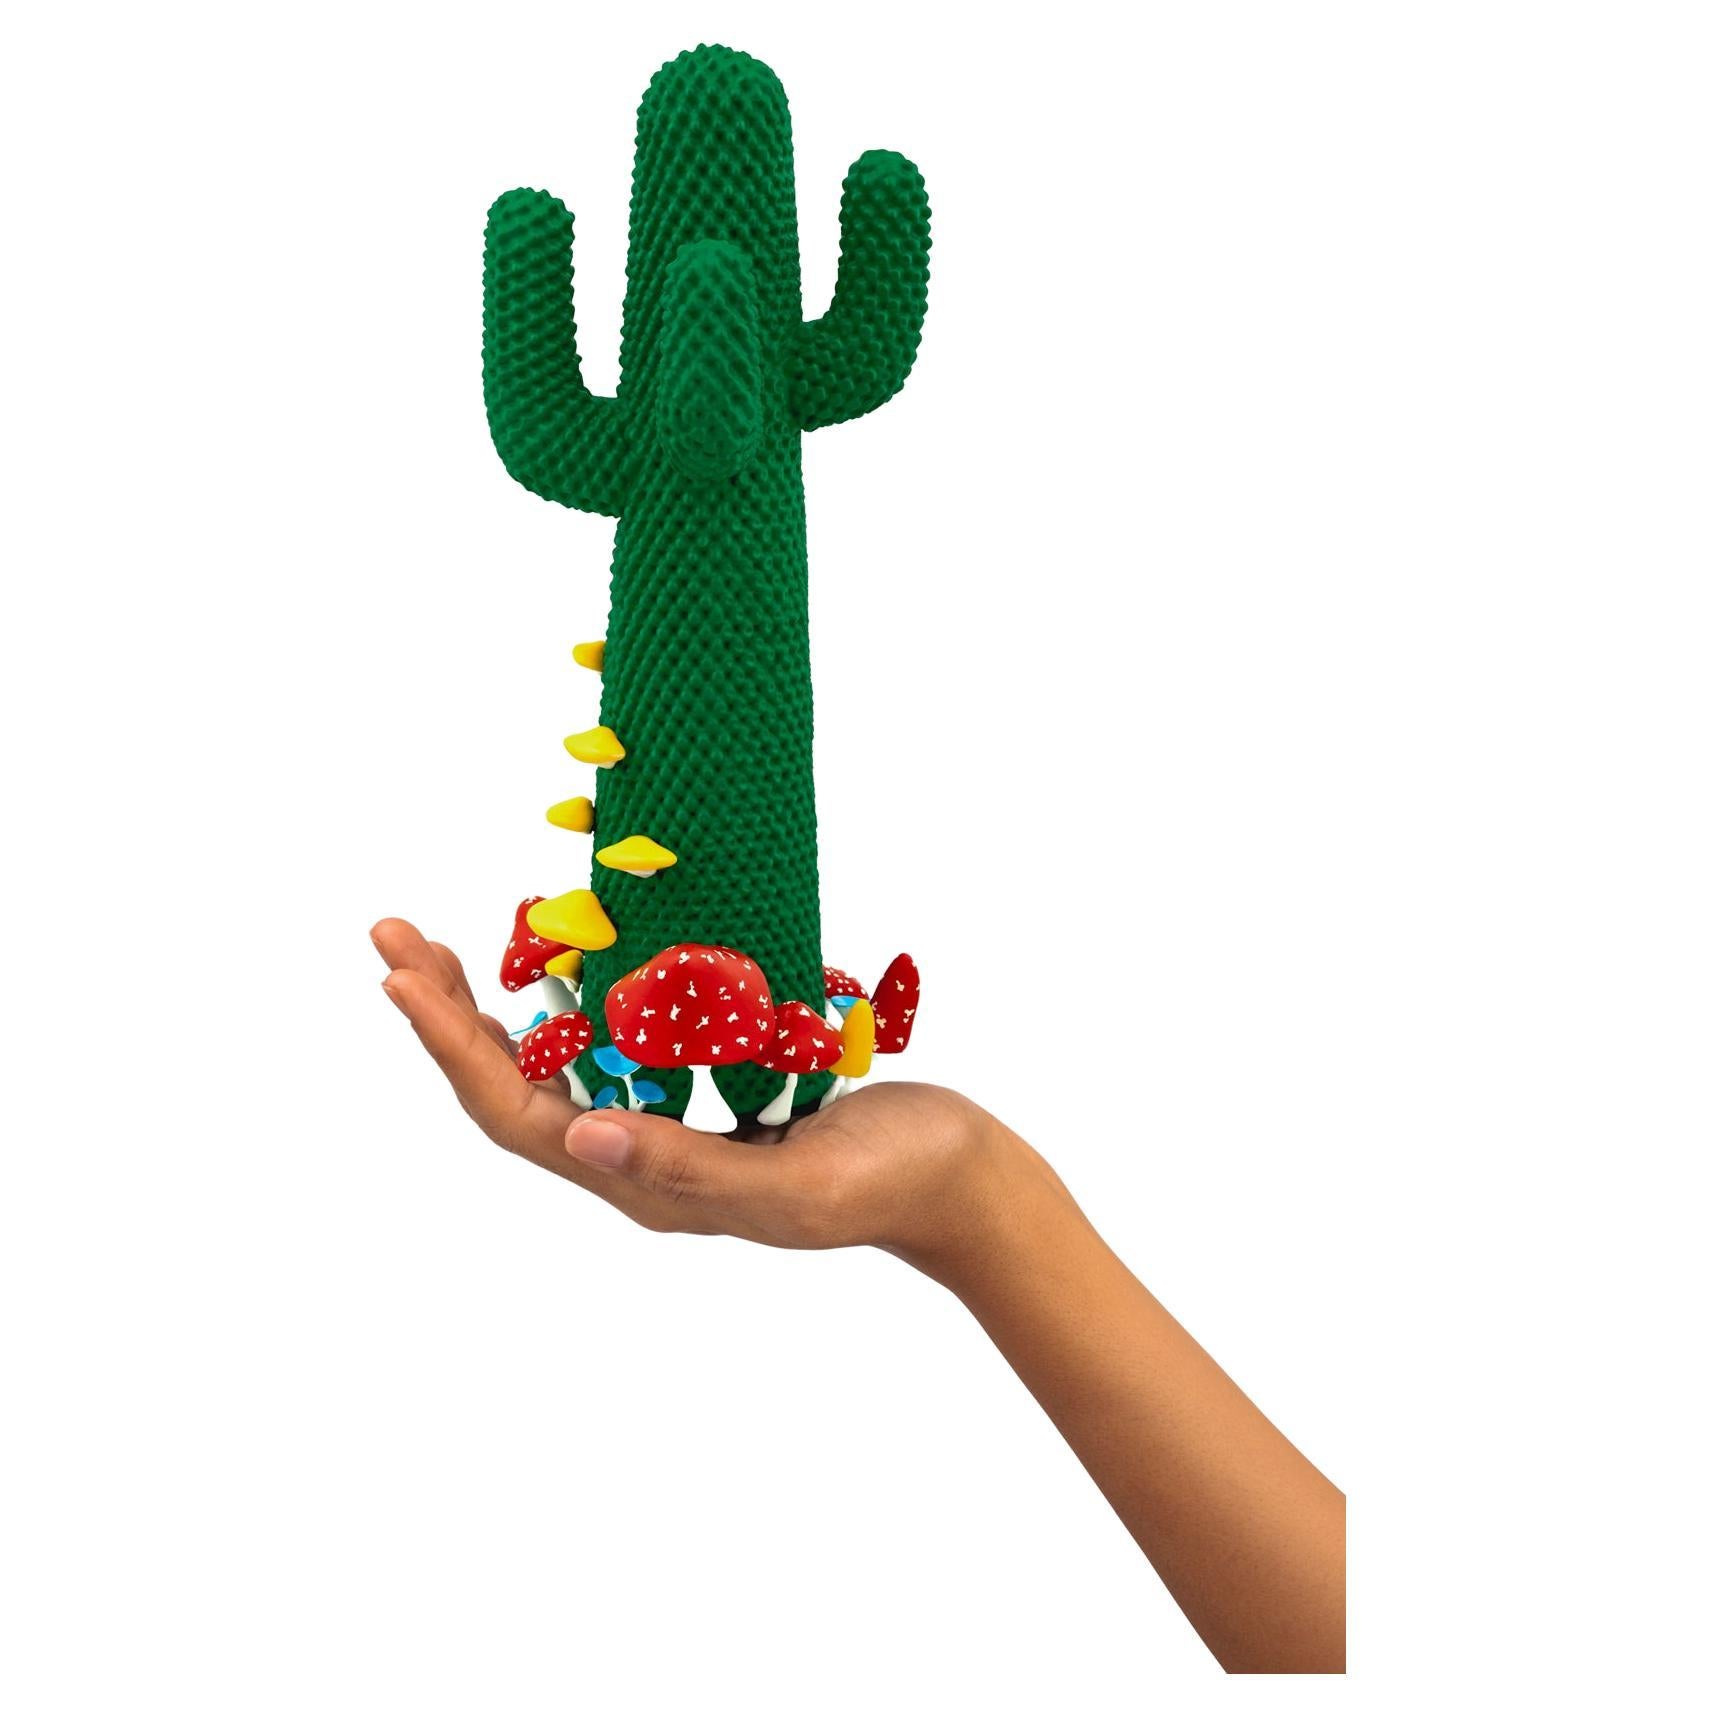 Limited Edition #71/99

Gufram presents the miniaturised version of the Shroom CACTUS® created in collaboration with A$AP Rocky and the artist’s new design studio HOMMEMADE Exactly as the real-size Shroom CACTUS®, the new Guframini piece features